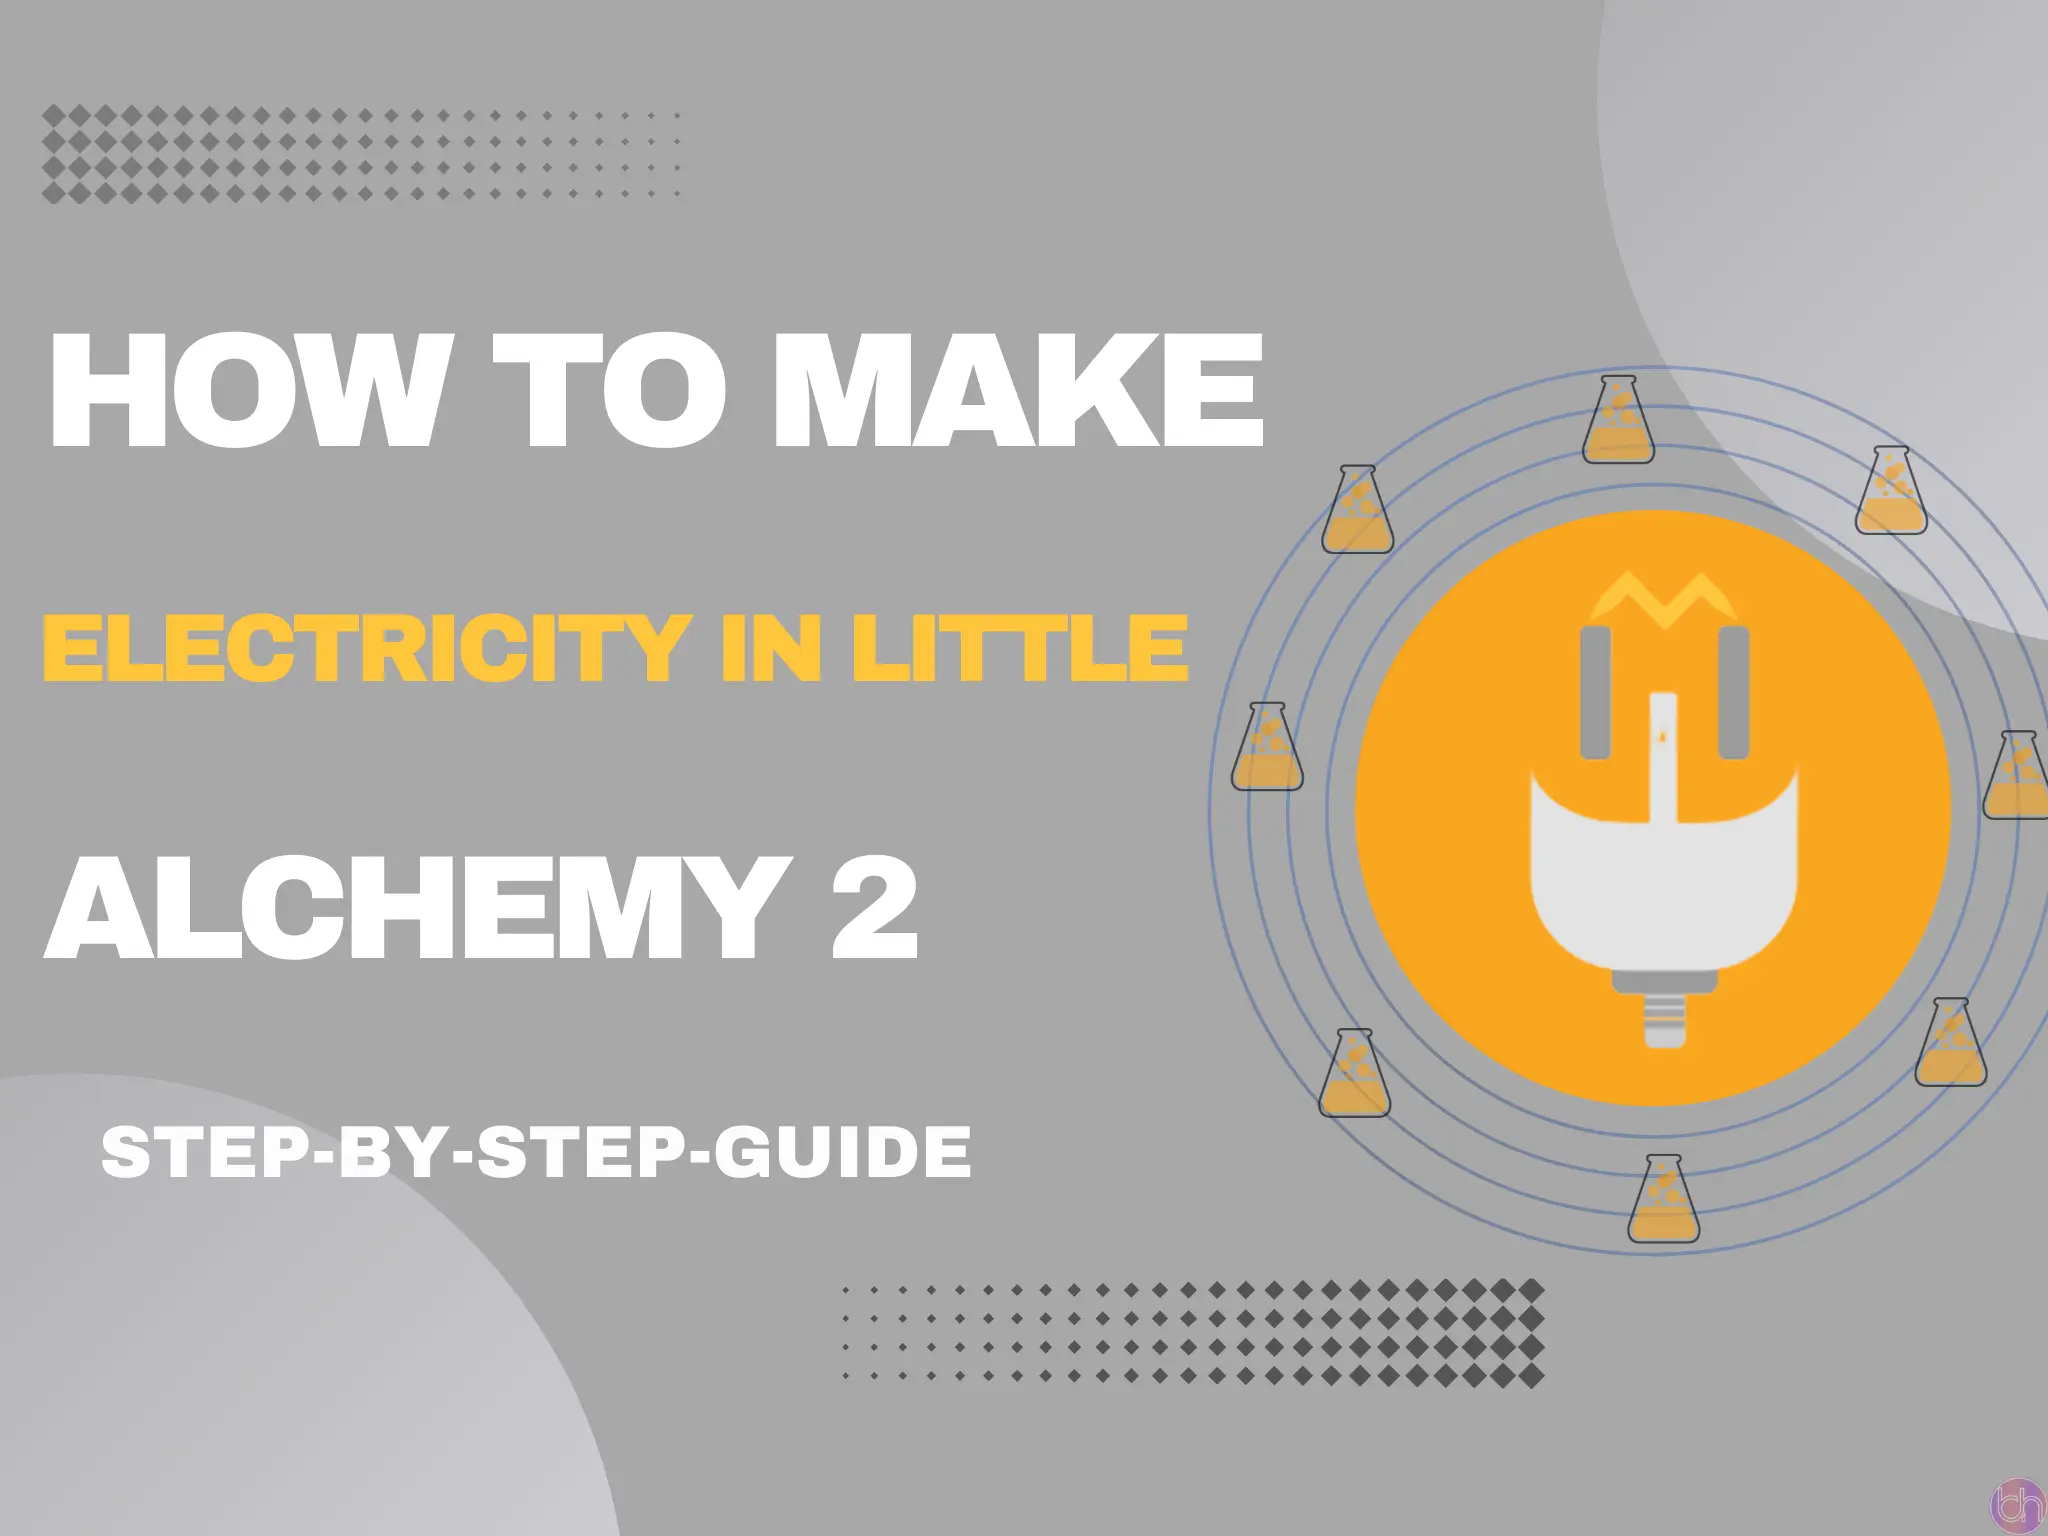 How to make Electricity in little alchemy 2